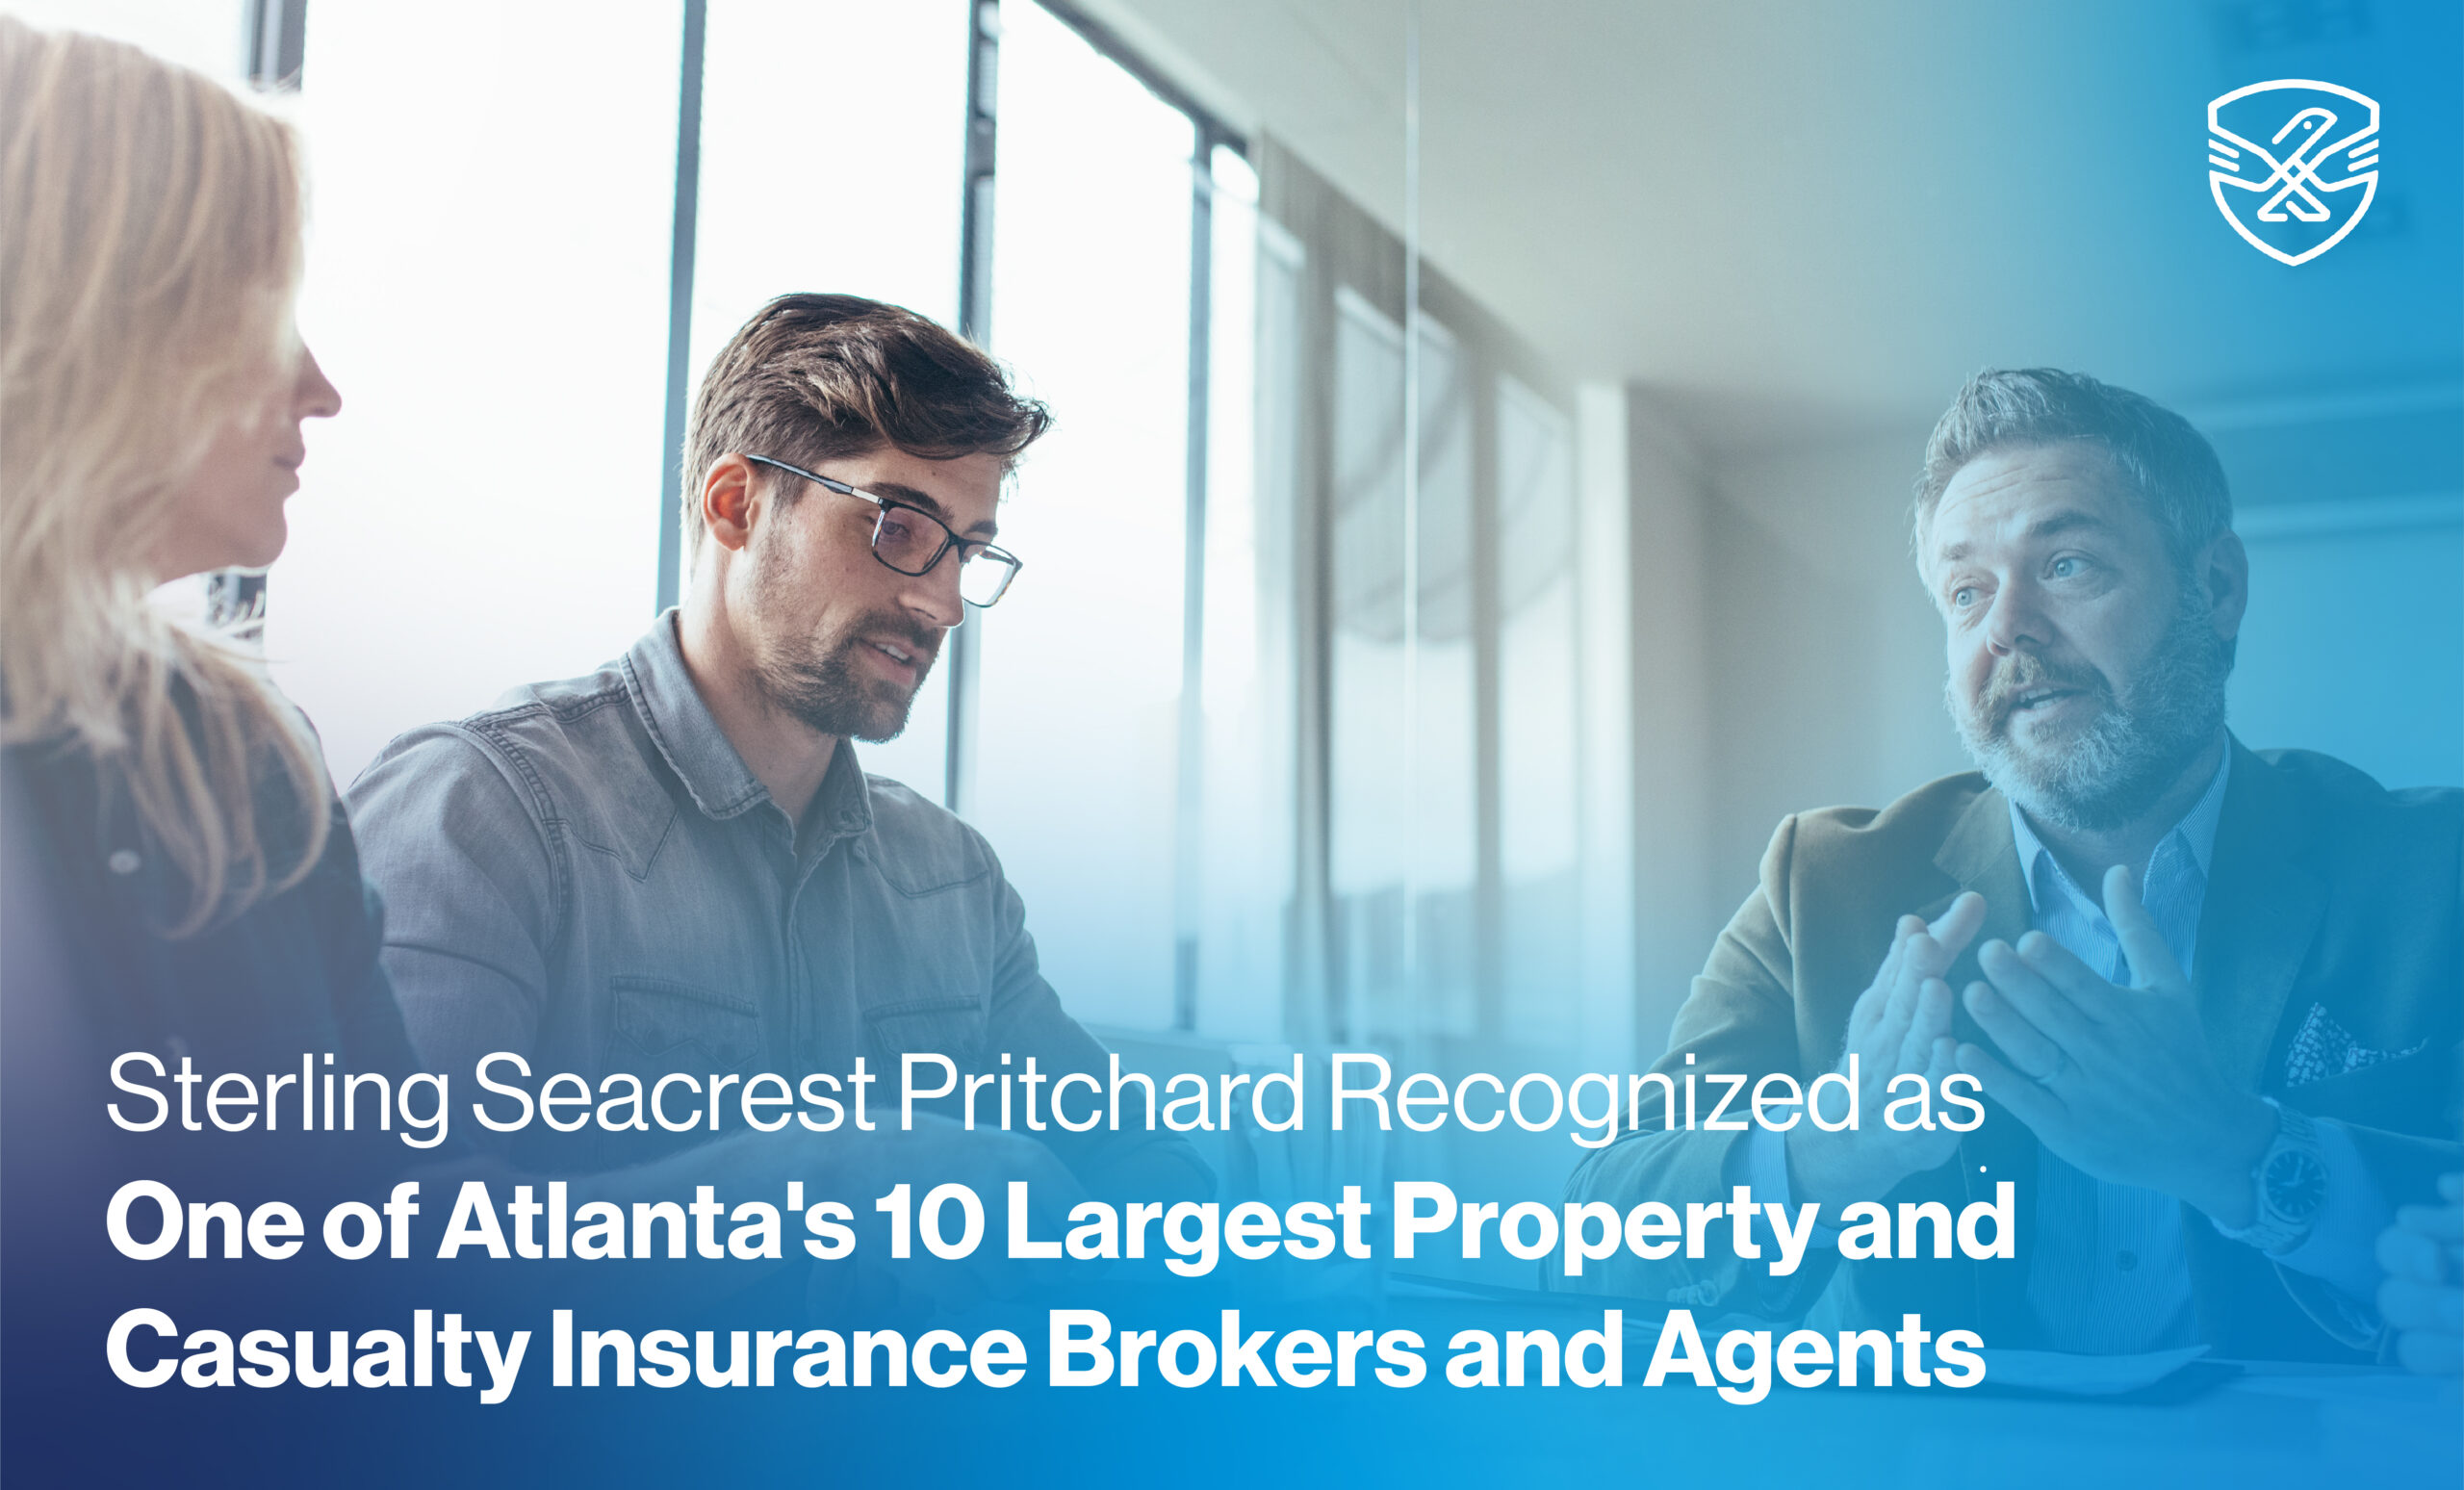 Sterling Seacrest Pritchard Recognized as One of Atlanta's 10 Largest Property and Casualty Insurance Brokers and Agents